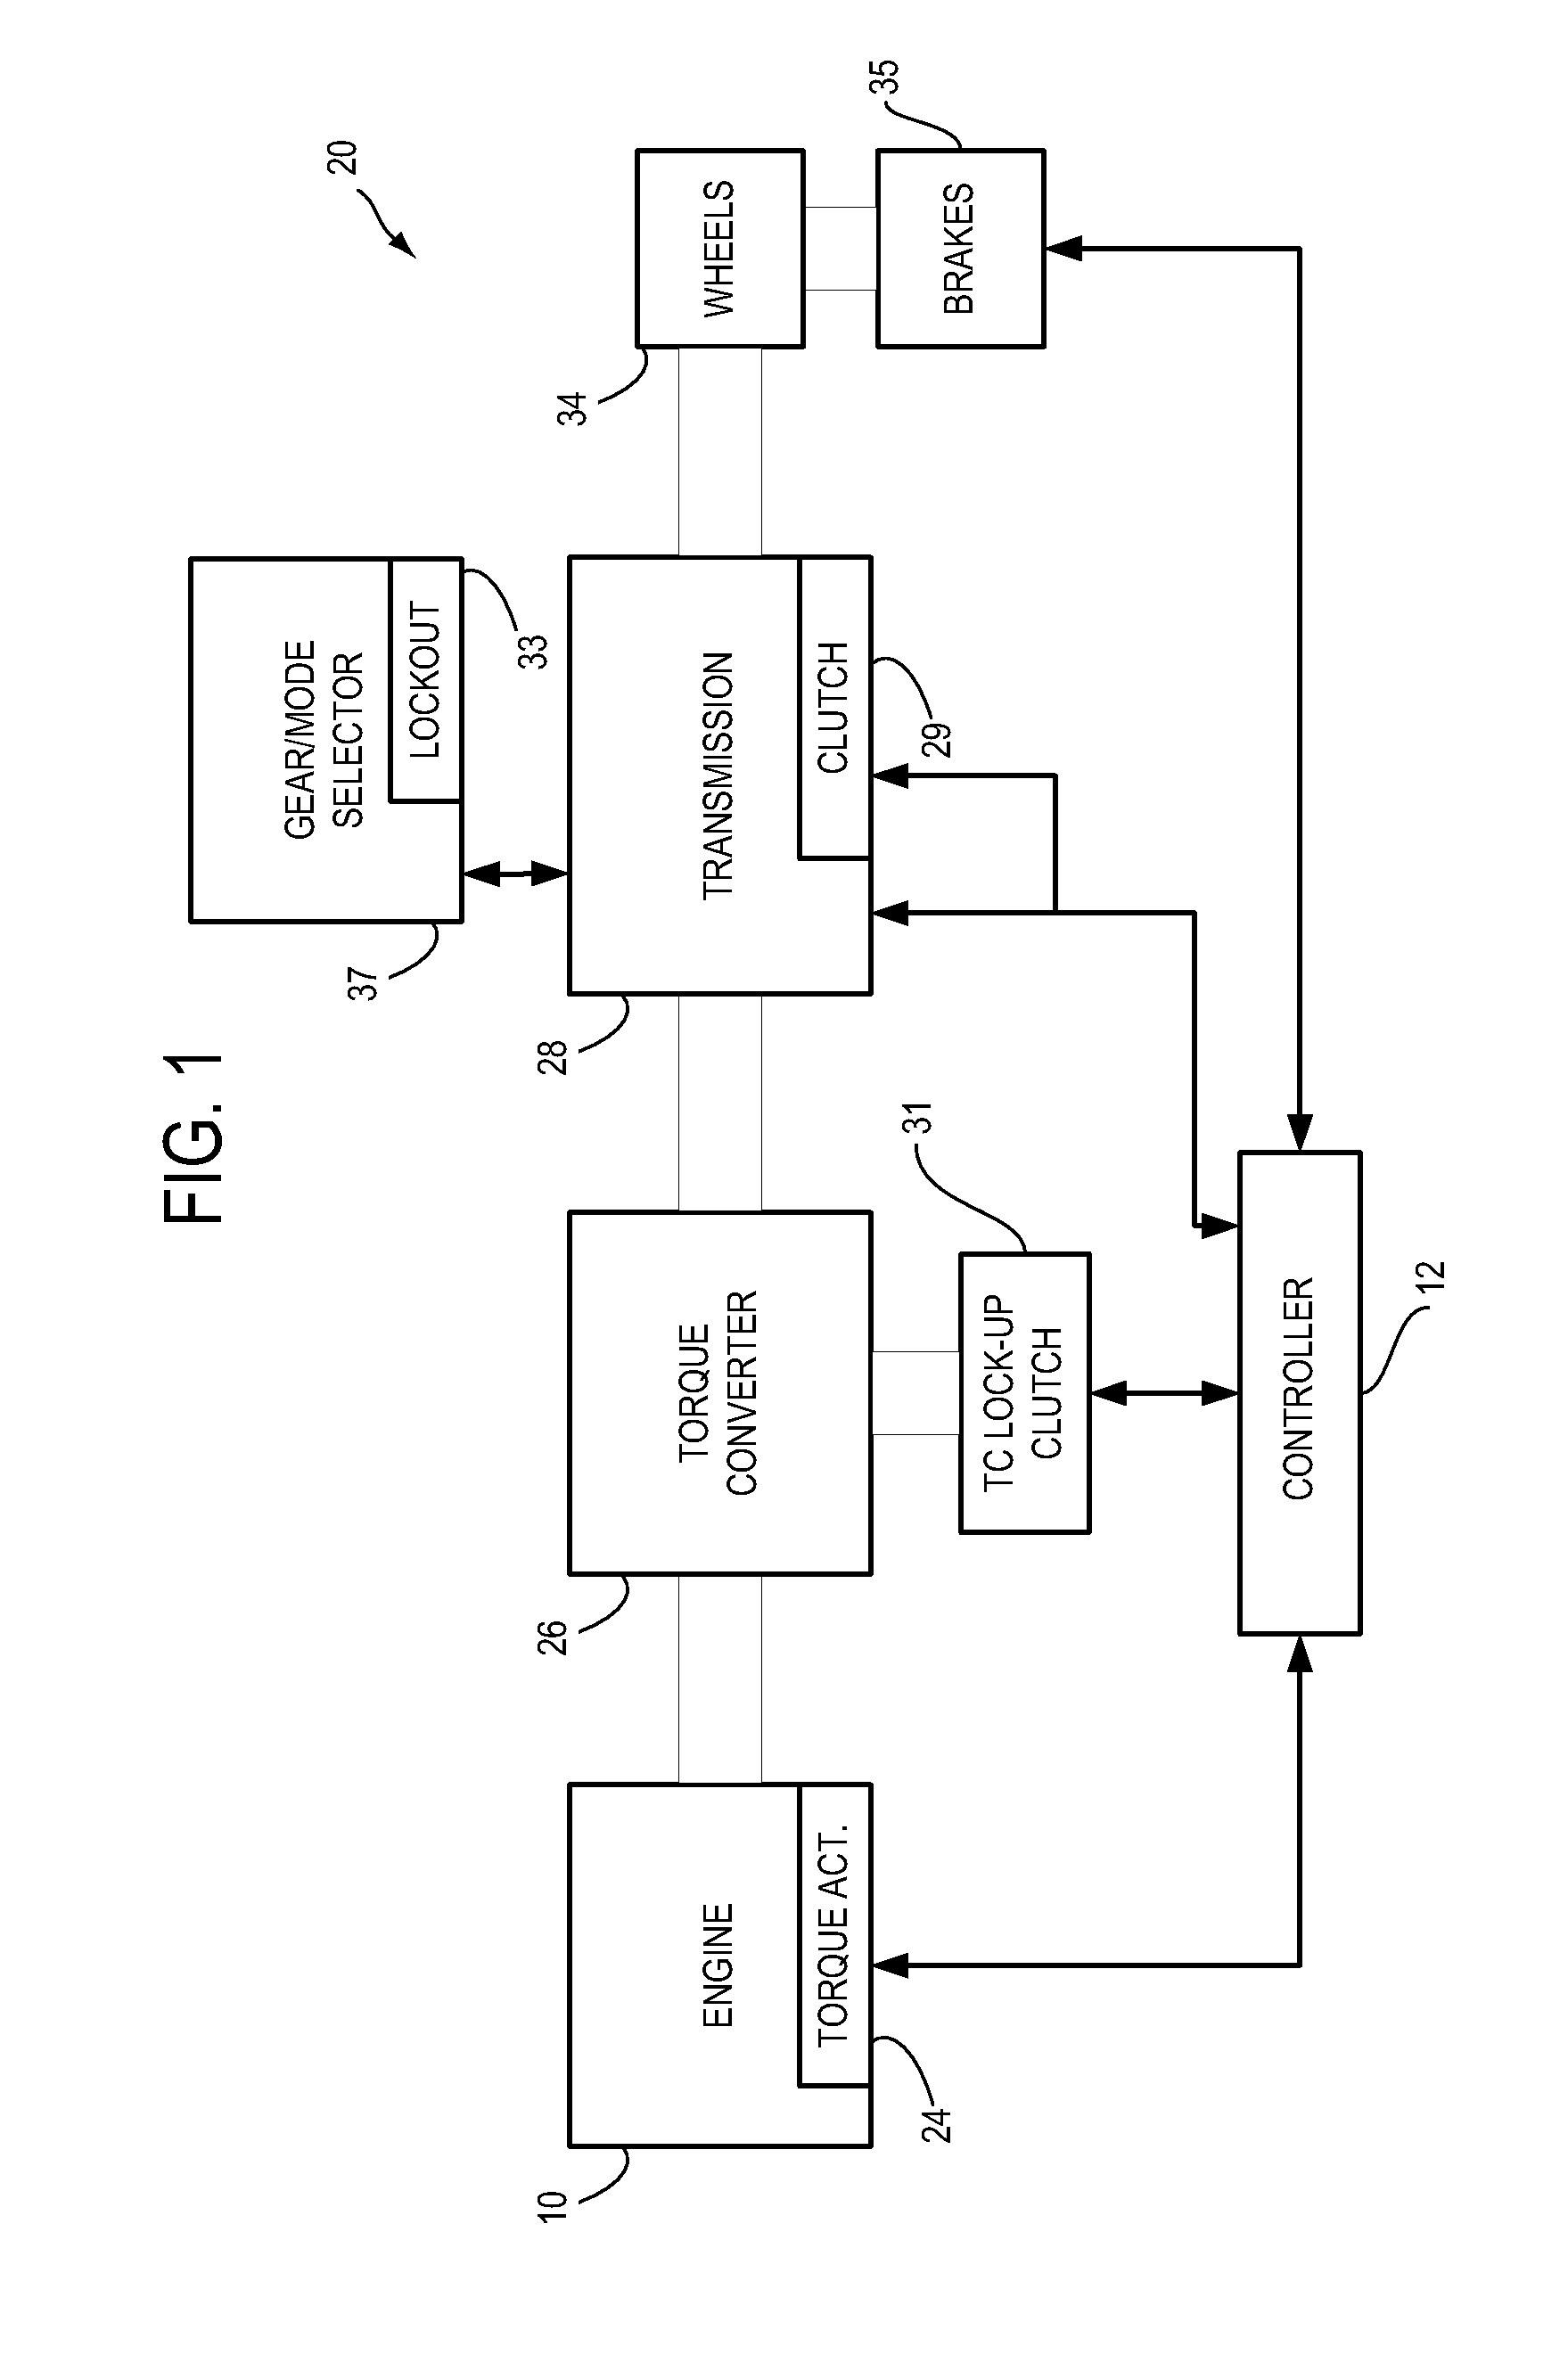 Controlling of a Vehicle Responsive to Reductant Conditions